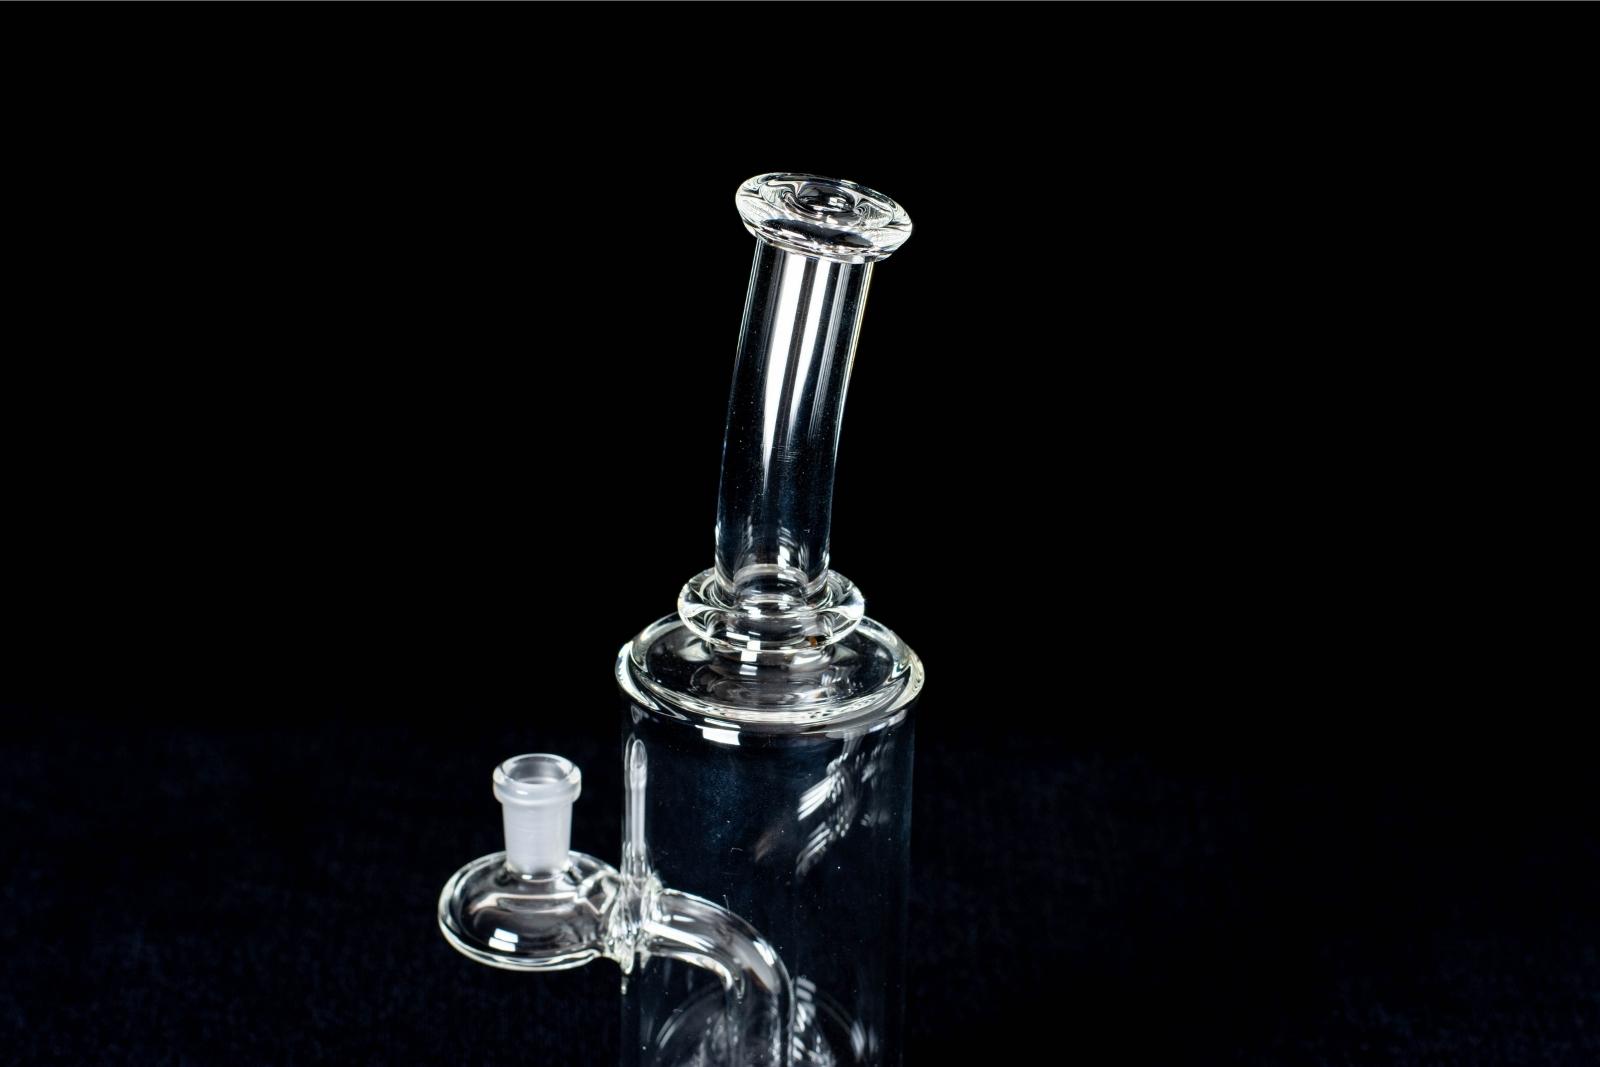 A clear, 7-inch banger hanger, made by BorOregon, on a black background